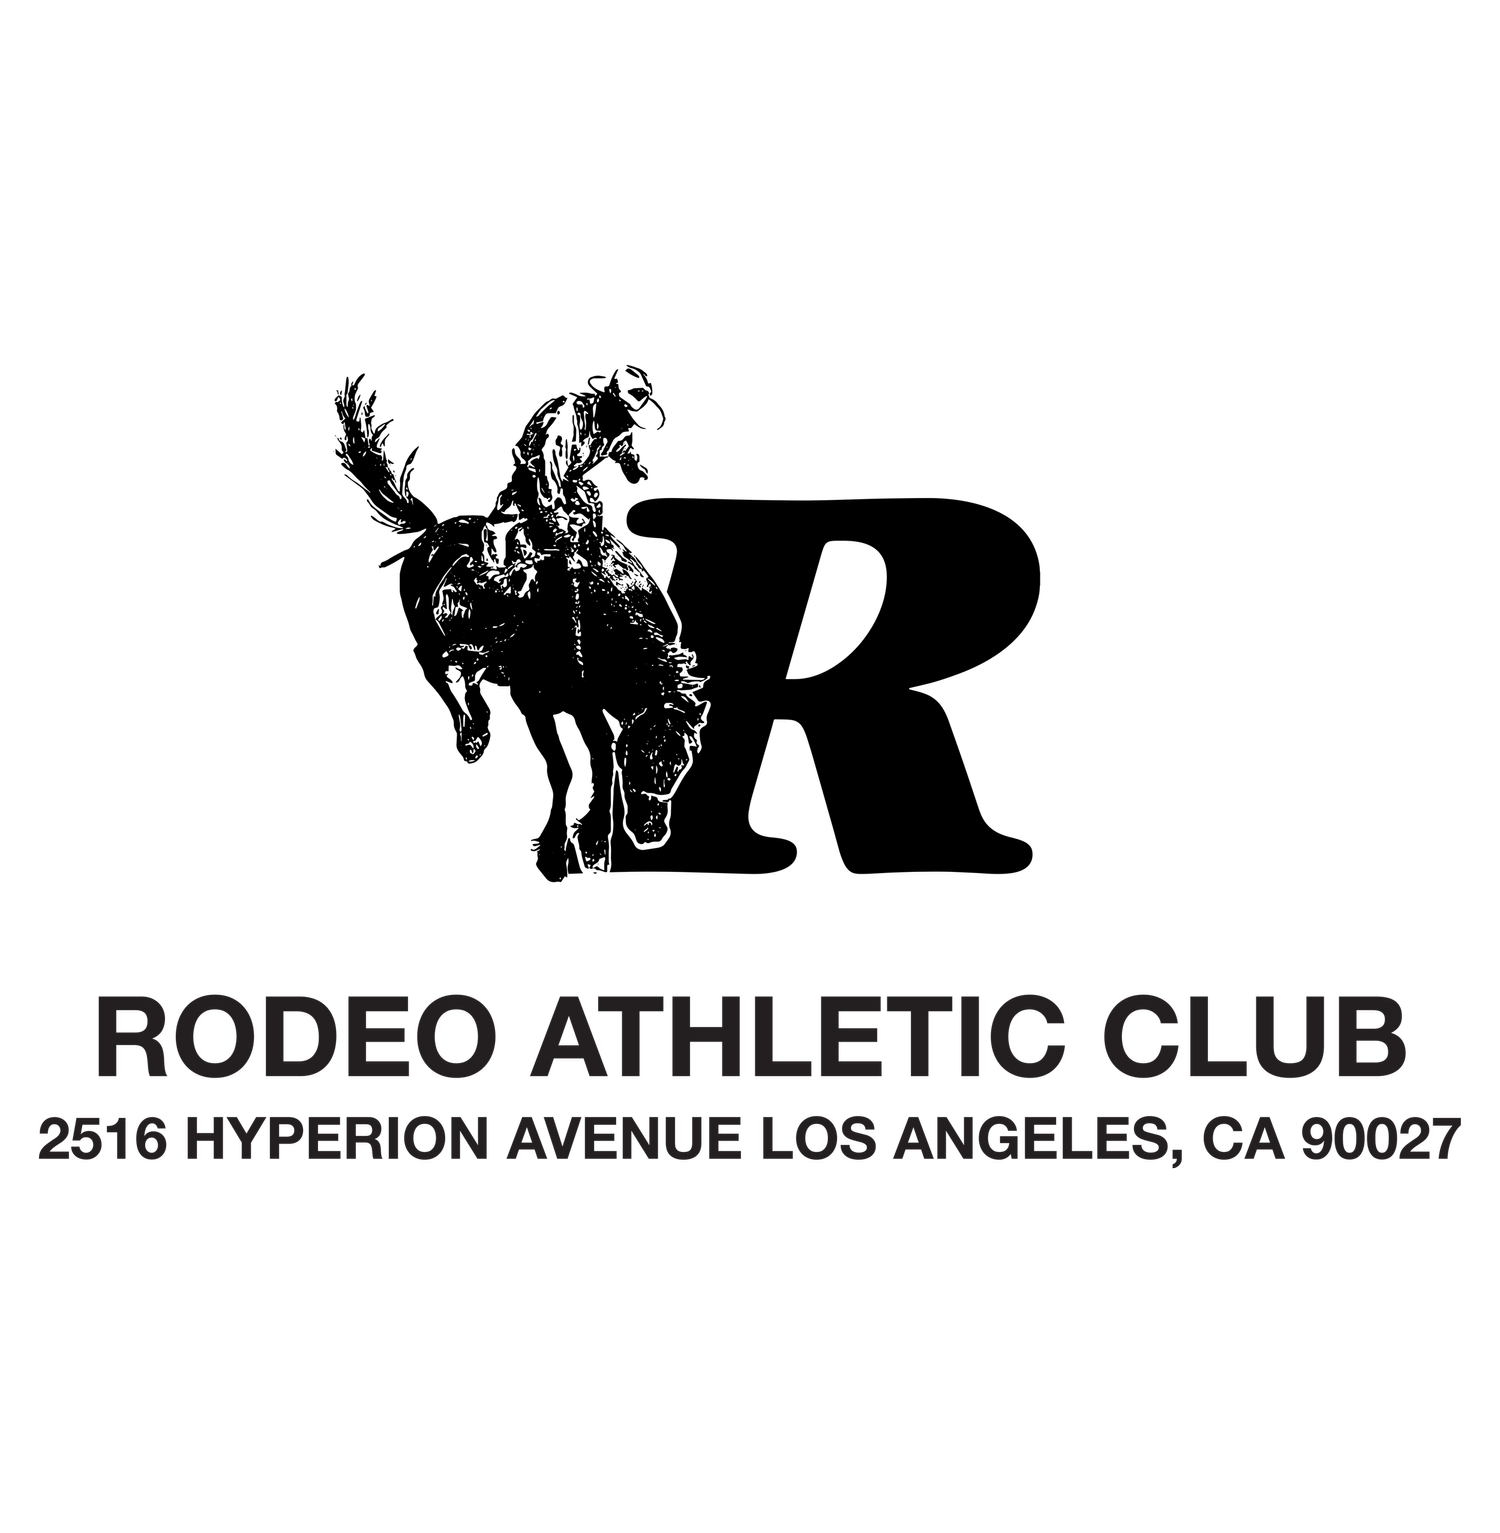 RODEO ATHLETIC CLUB